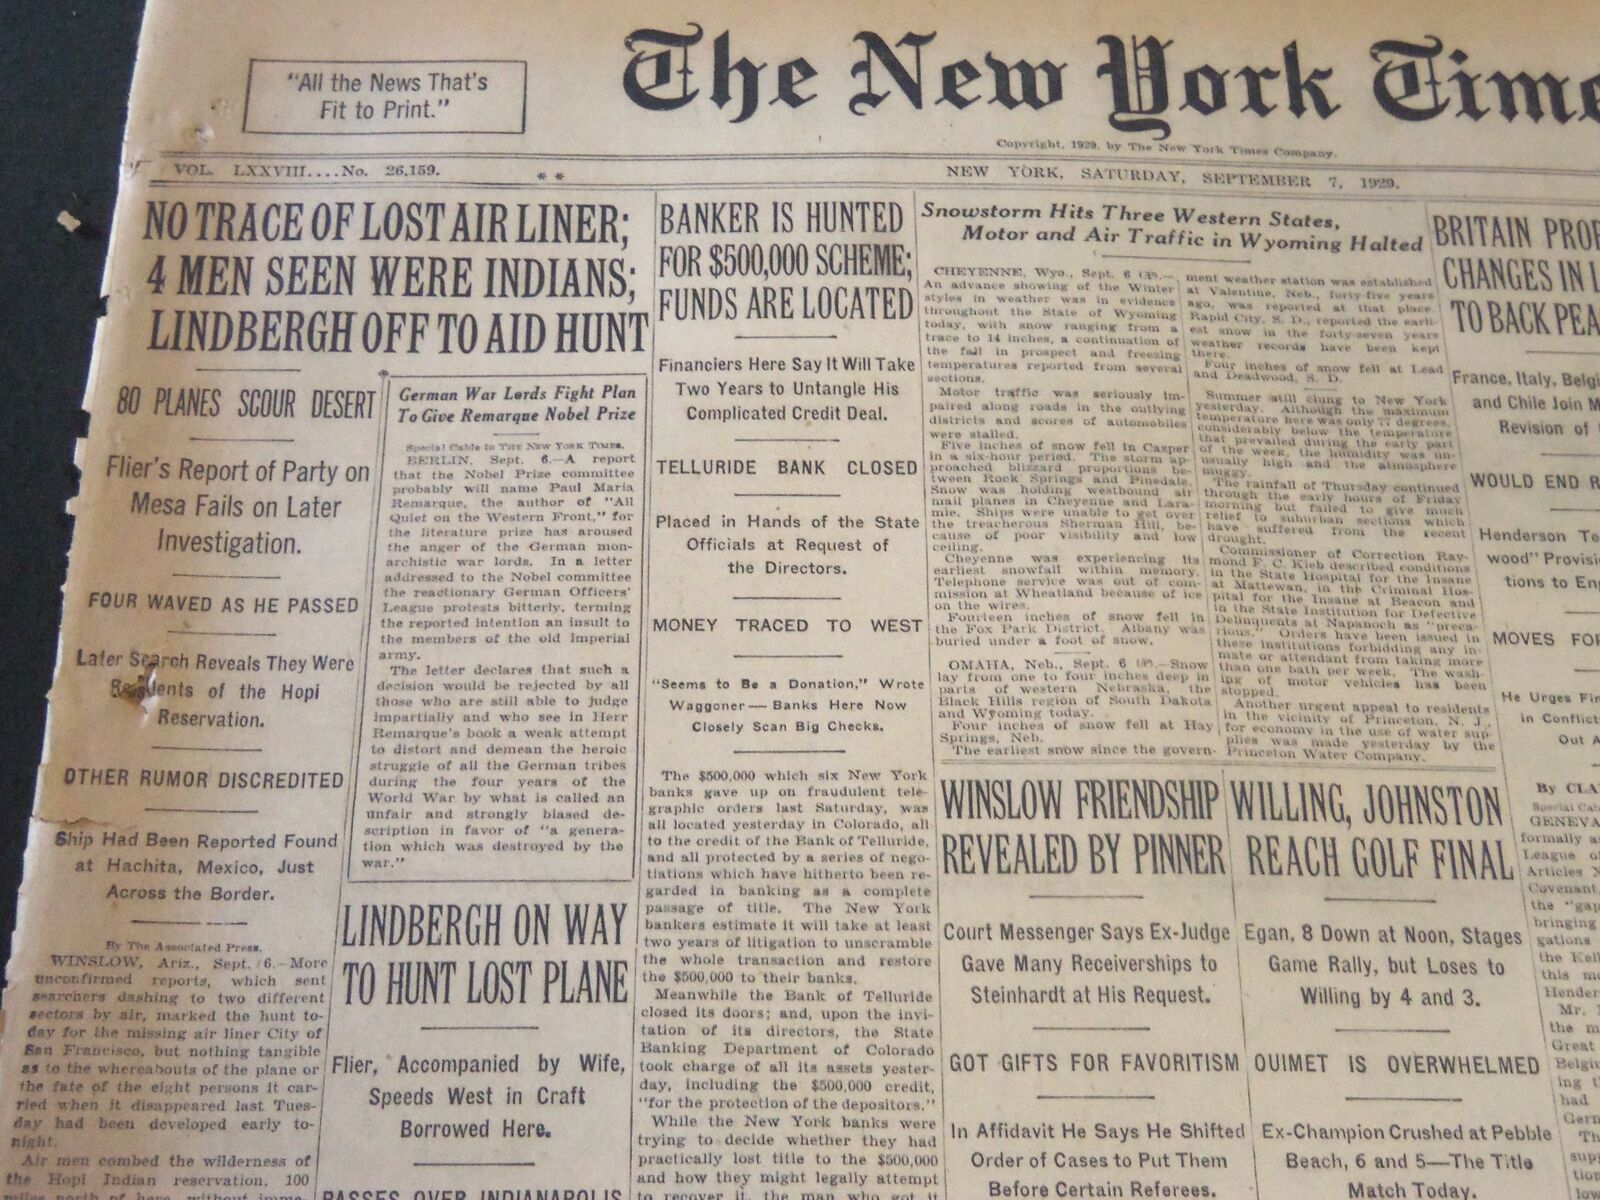 1929 SEPT 7 NEW YORK TIMES - AIR LINER LOST & LINDBERGH OFF TO AID - NT 6568